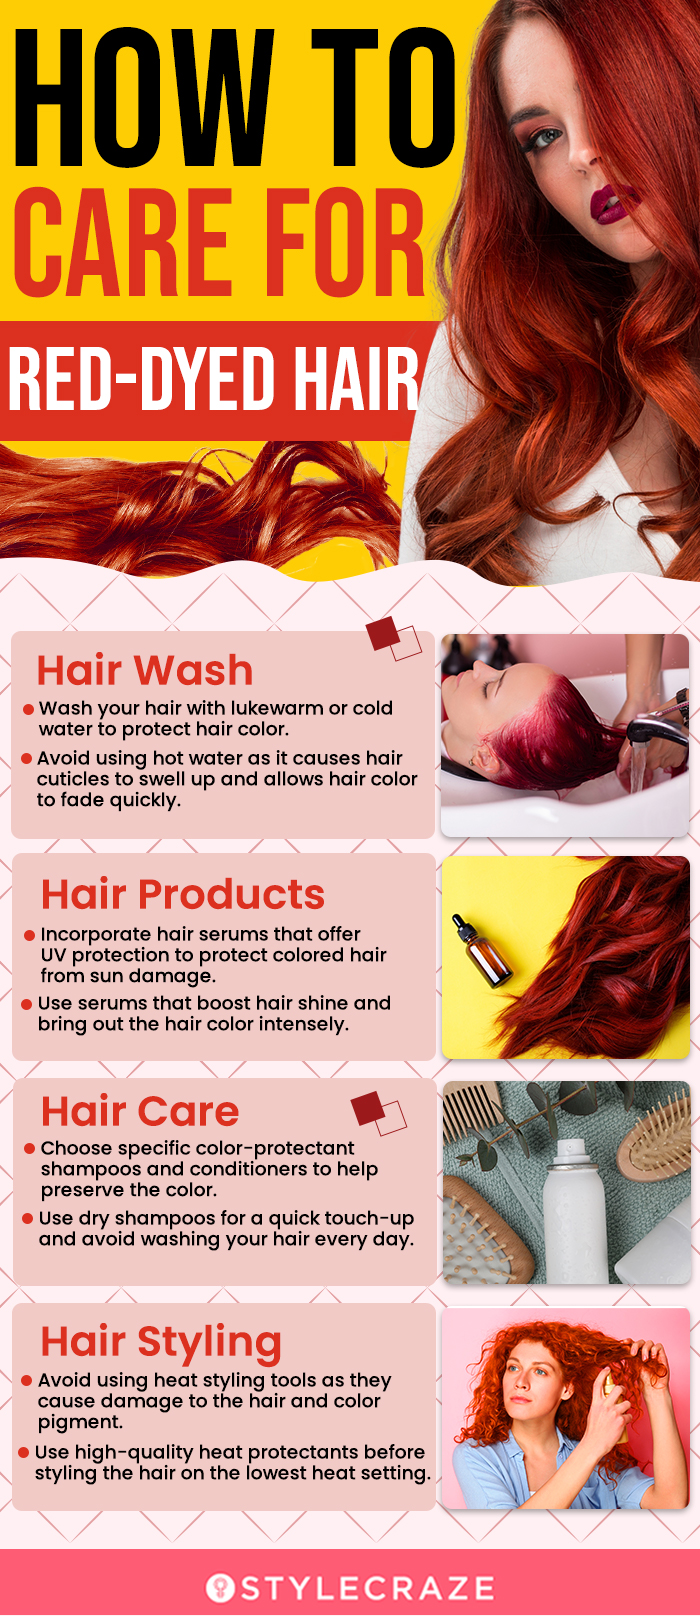 How To Care For Red-Dyed Hair (infographic)